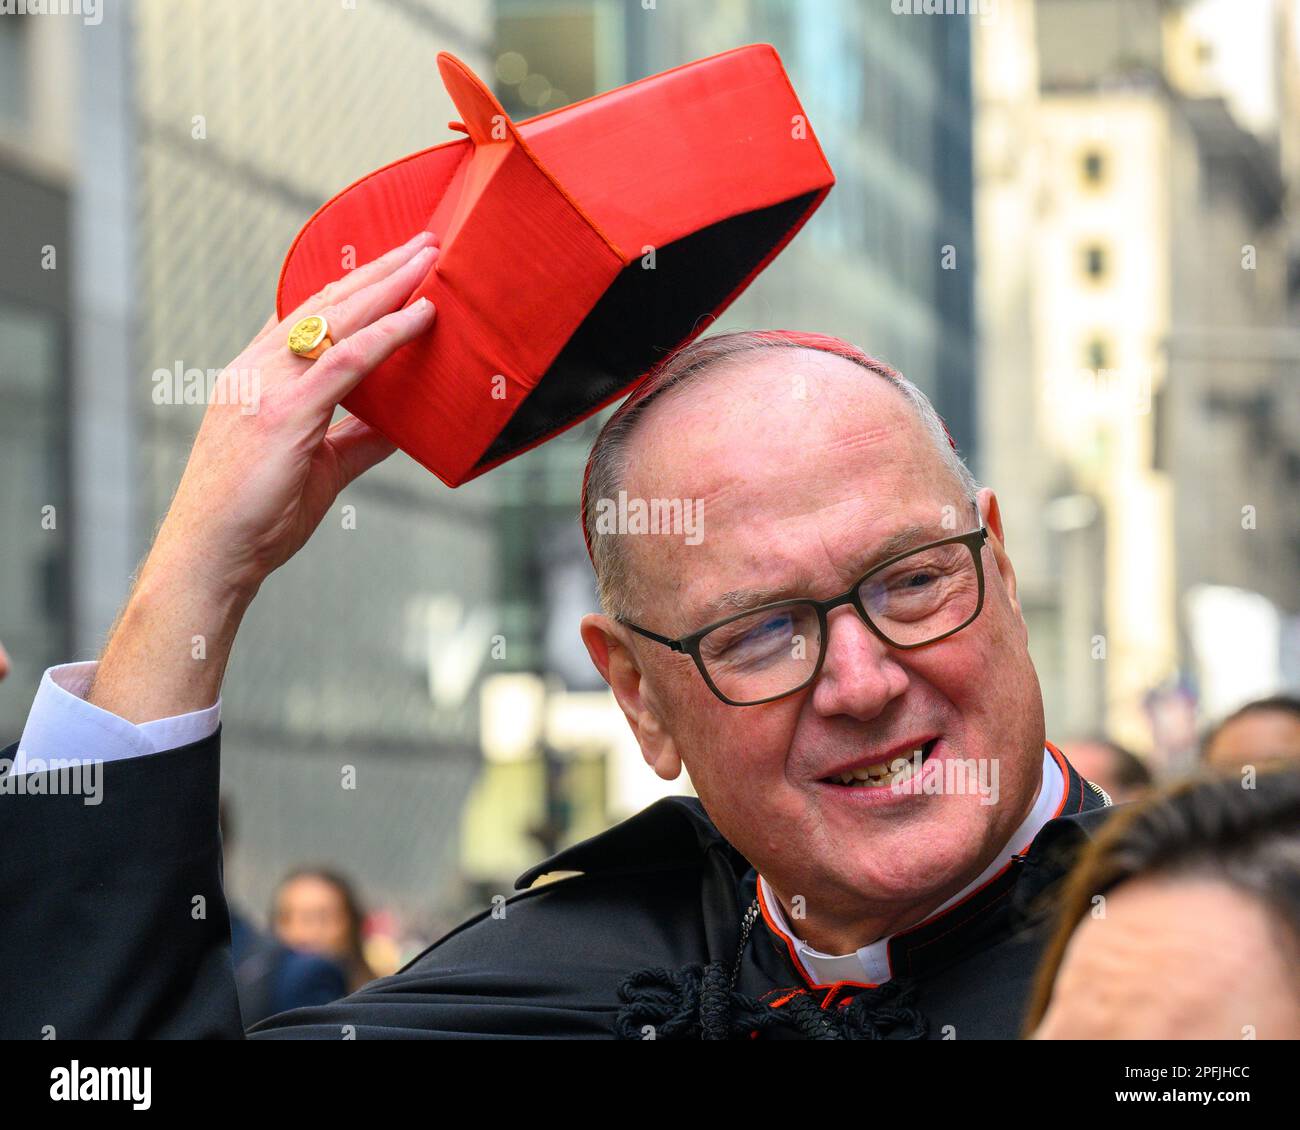 New York, USA. 17th Mar, 2023. New York city Cardinal Timothy Dolan lifts up his hat in front of St. Patrick's Cathedral during the St. Patrick's Day parade on March 17, 2023. About 150,000 people march through Fifth Avenue every year in the largest the St. Patrick's Day Parade, who has been held annually since 1762 to celebrate Irish heritage. Credit: Enrique Shore/Alamy Live News Stock Photo